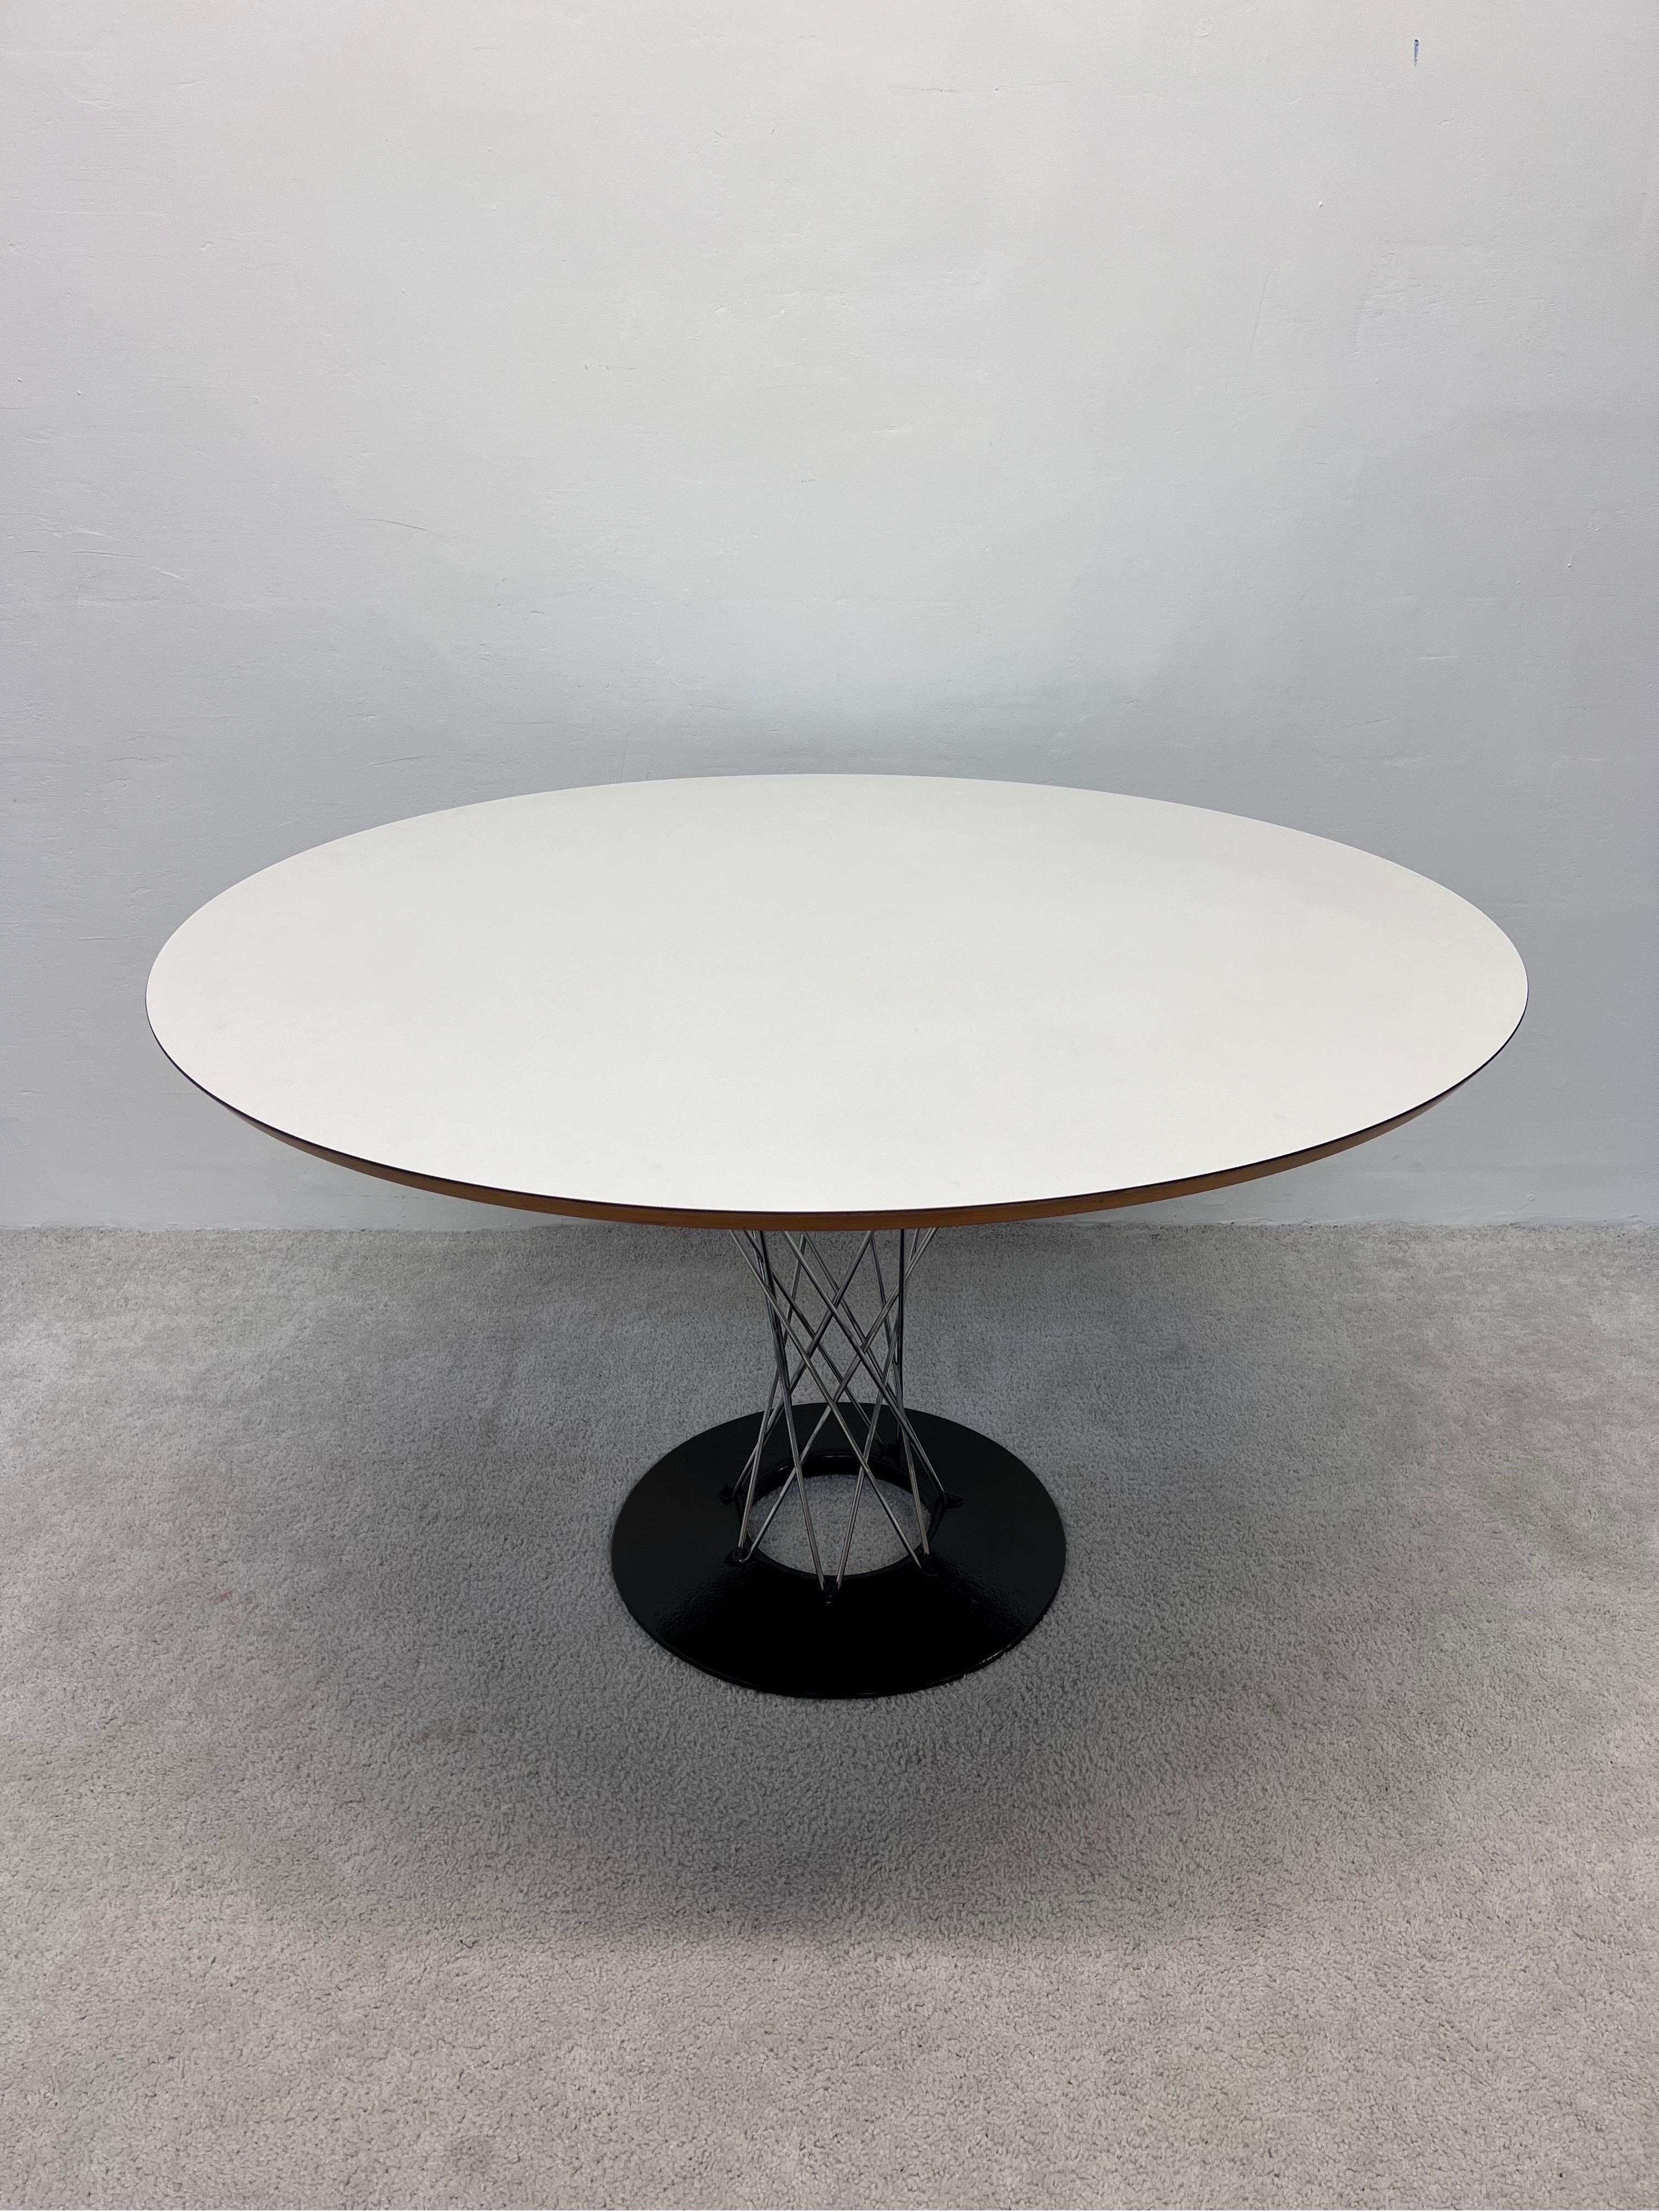 American Isamu Noguchi Cyclone Dining Table with White Laminate Top for Knoll, 1971